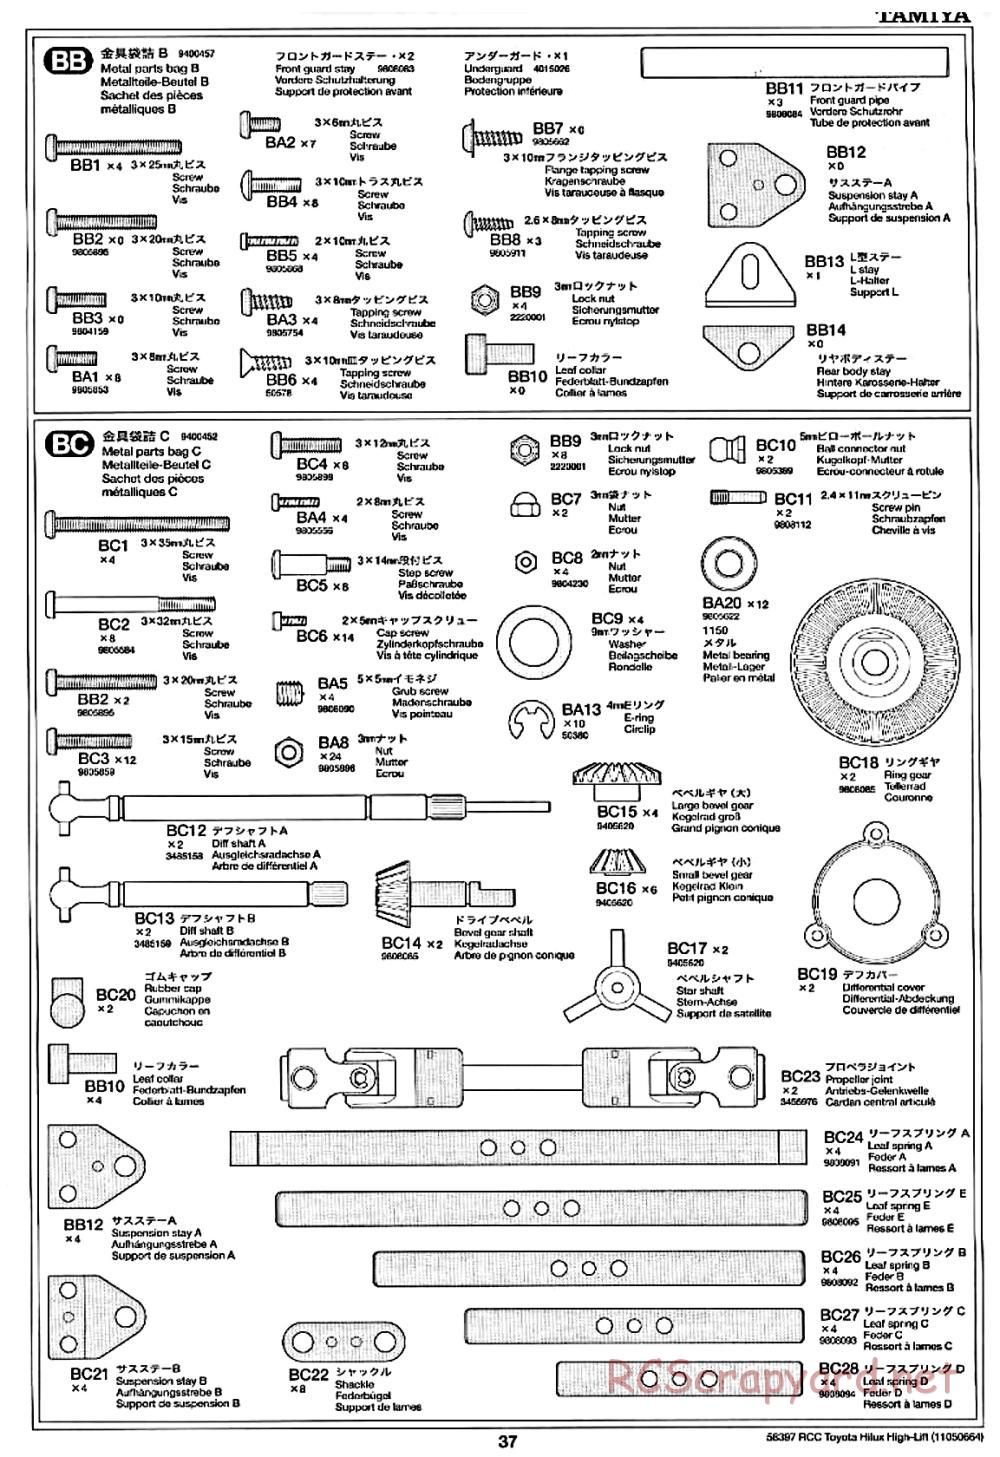 Tamiya - Toyota Hilux High-Lift Chassis - Manual - Page 32